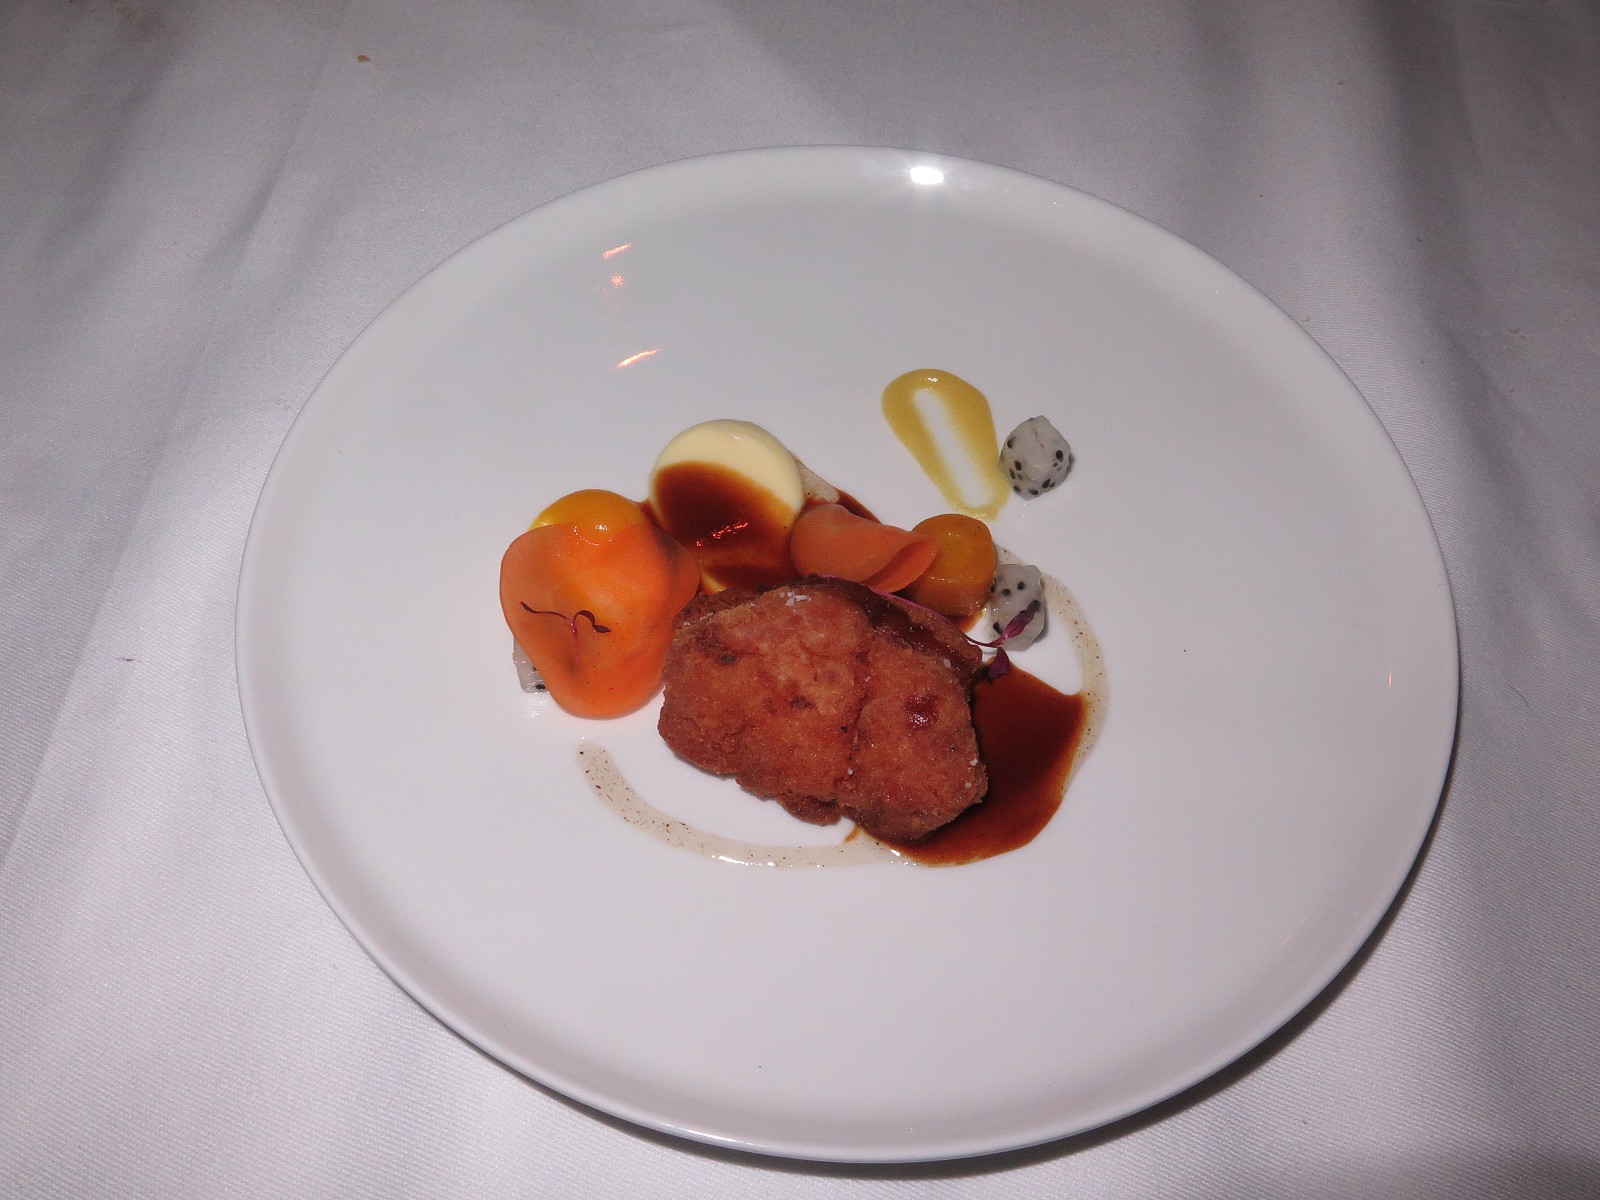 “Calf's sweetbread with lemon and yuzu, texture of carrots, jus of lemongrass with combava”